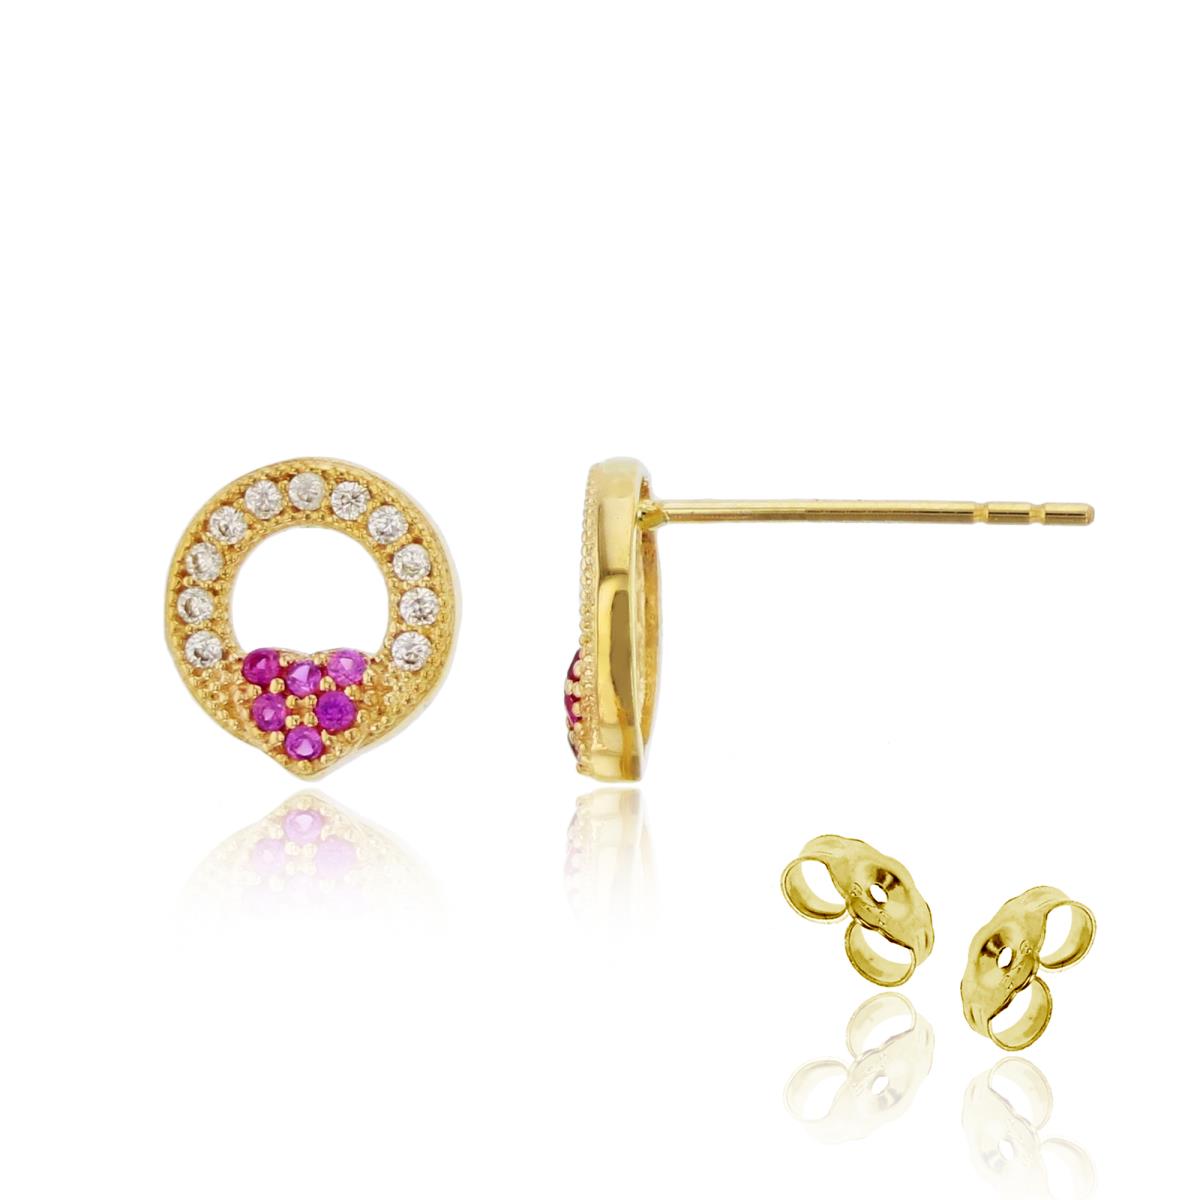 14K Yellow Gold Paved Ruby & White CZ Heart Circle Stud Earring with 4.5mm Clutch